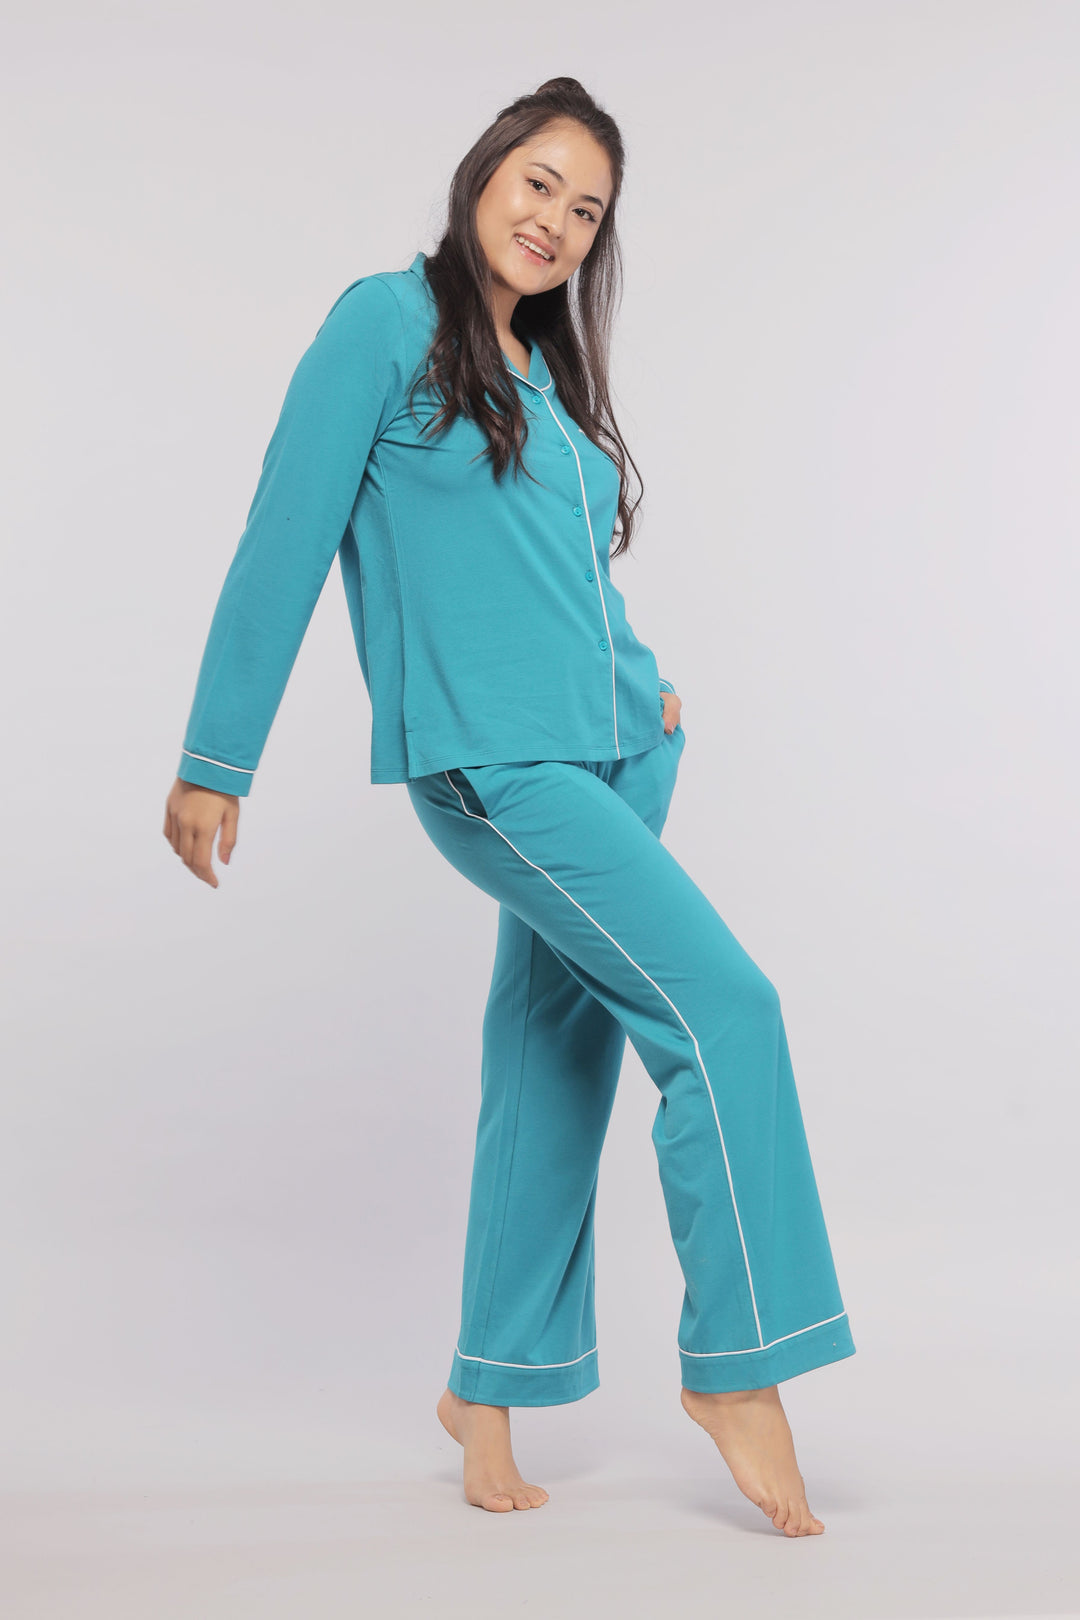 Teal Pajamas with White Piping